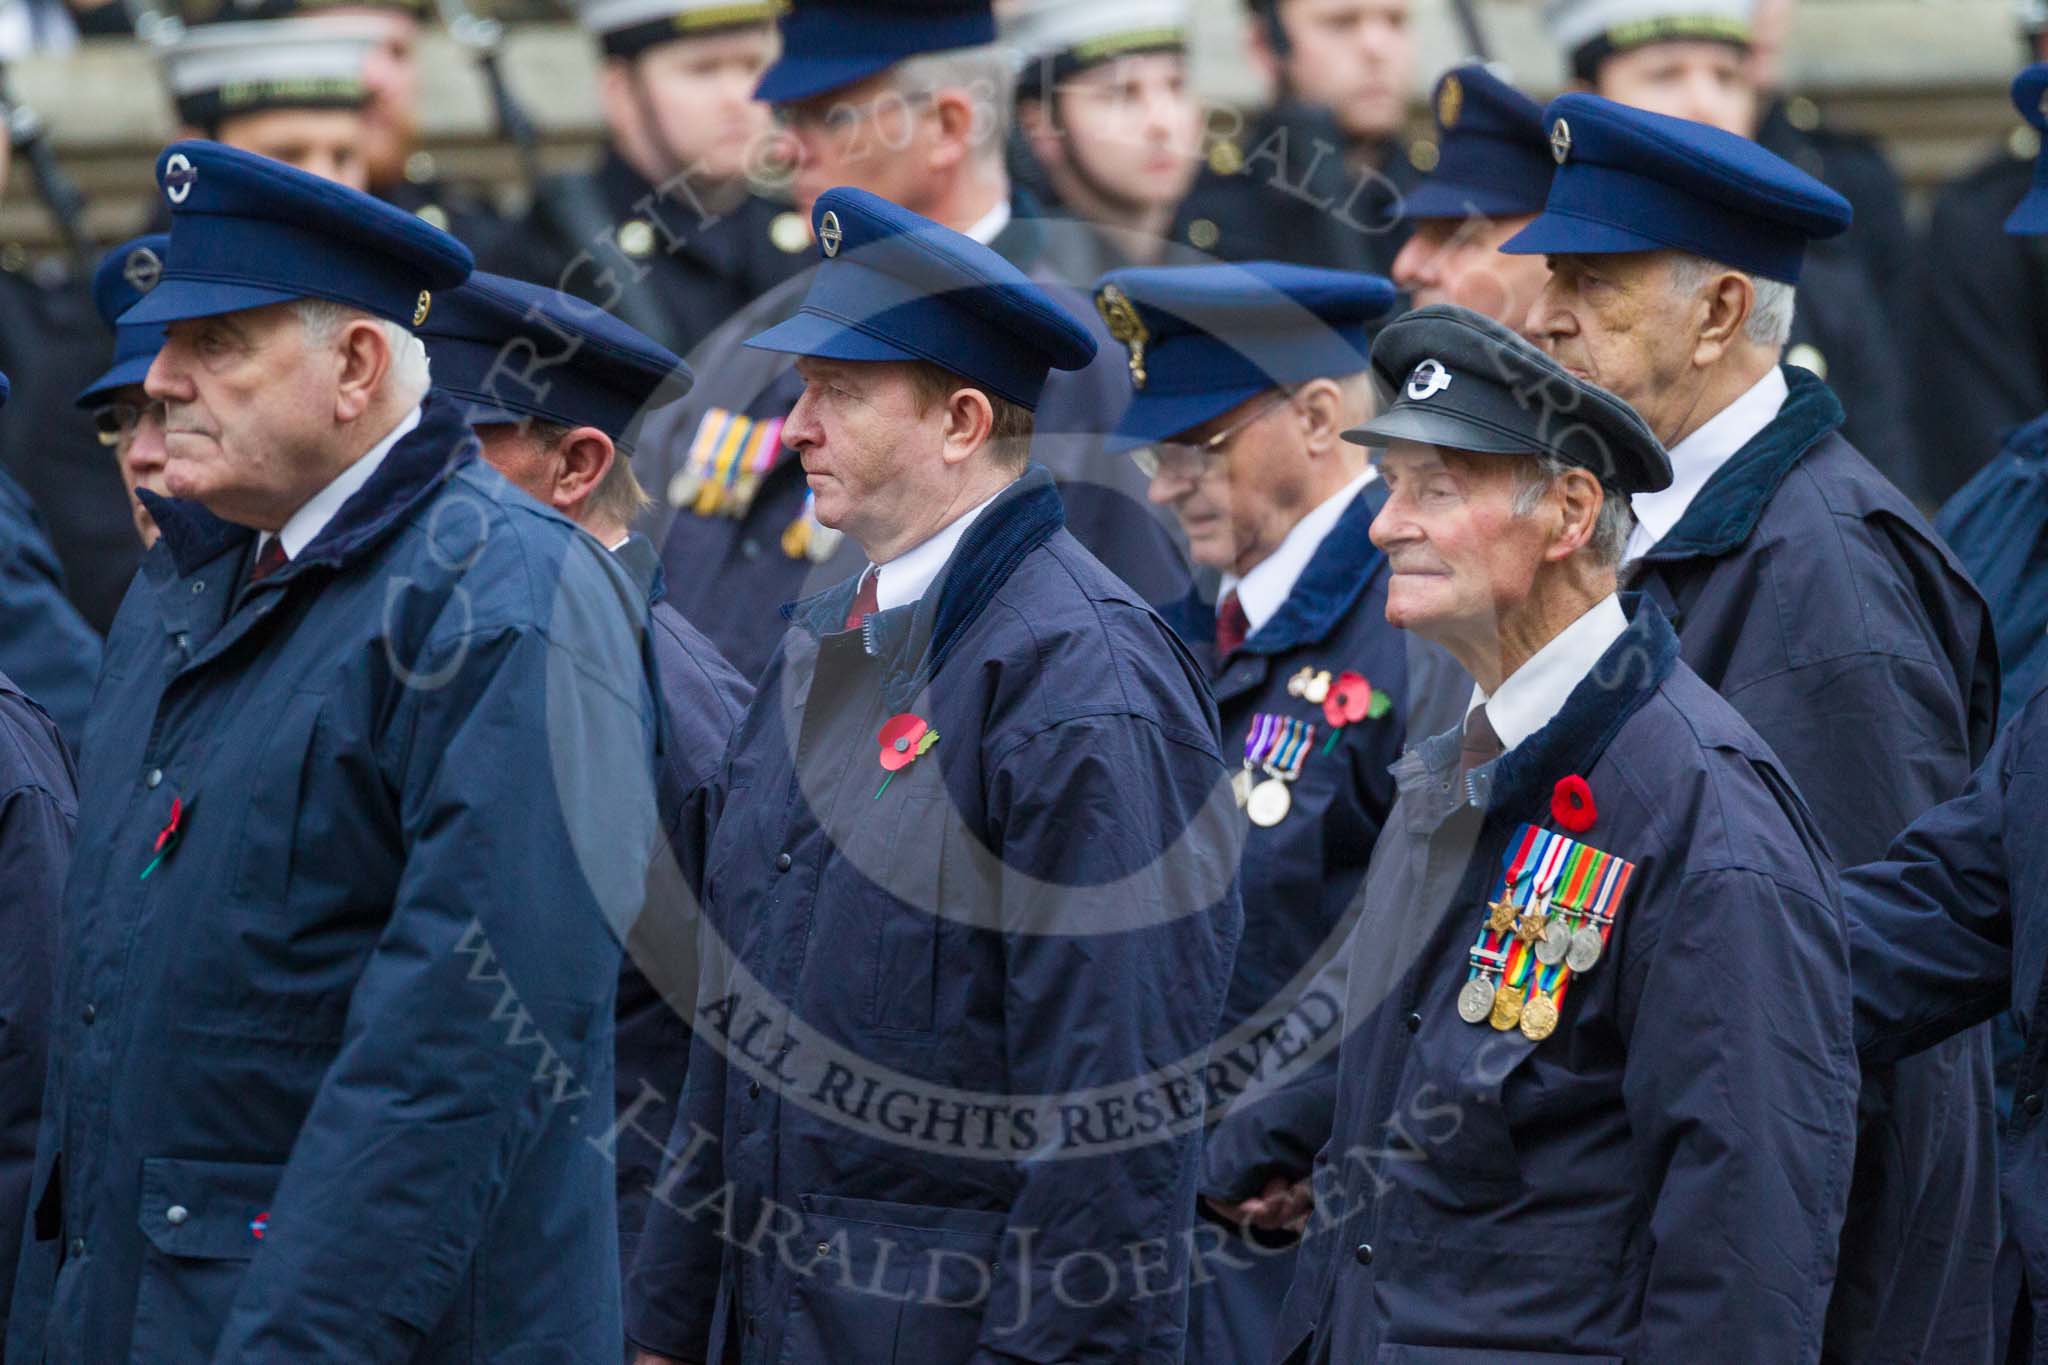 Remembrance Sunday at the Cenotaph 2015: Group M1, Transport for London.
Cenotaph, Whitehall, London SW1,
London,
Greater London,
United Kingdom,
on 08 November 2015 at 12:14, image #1419